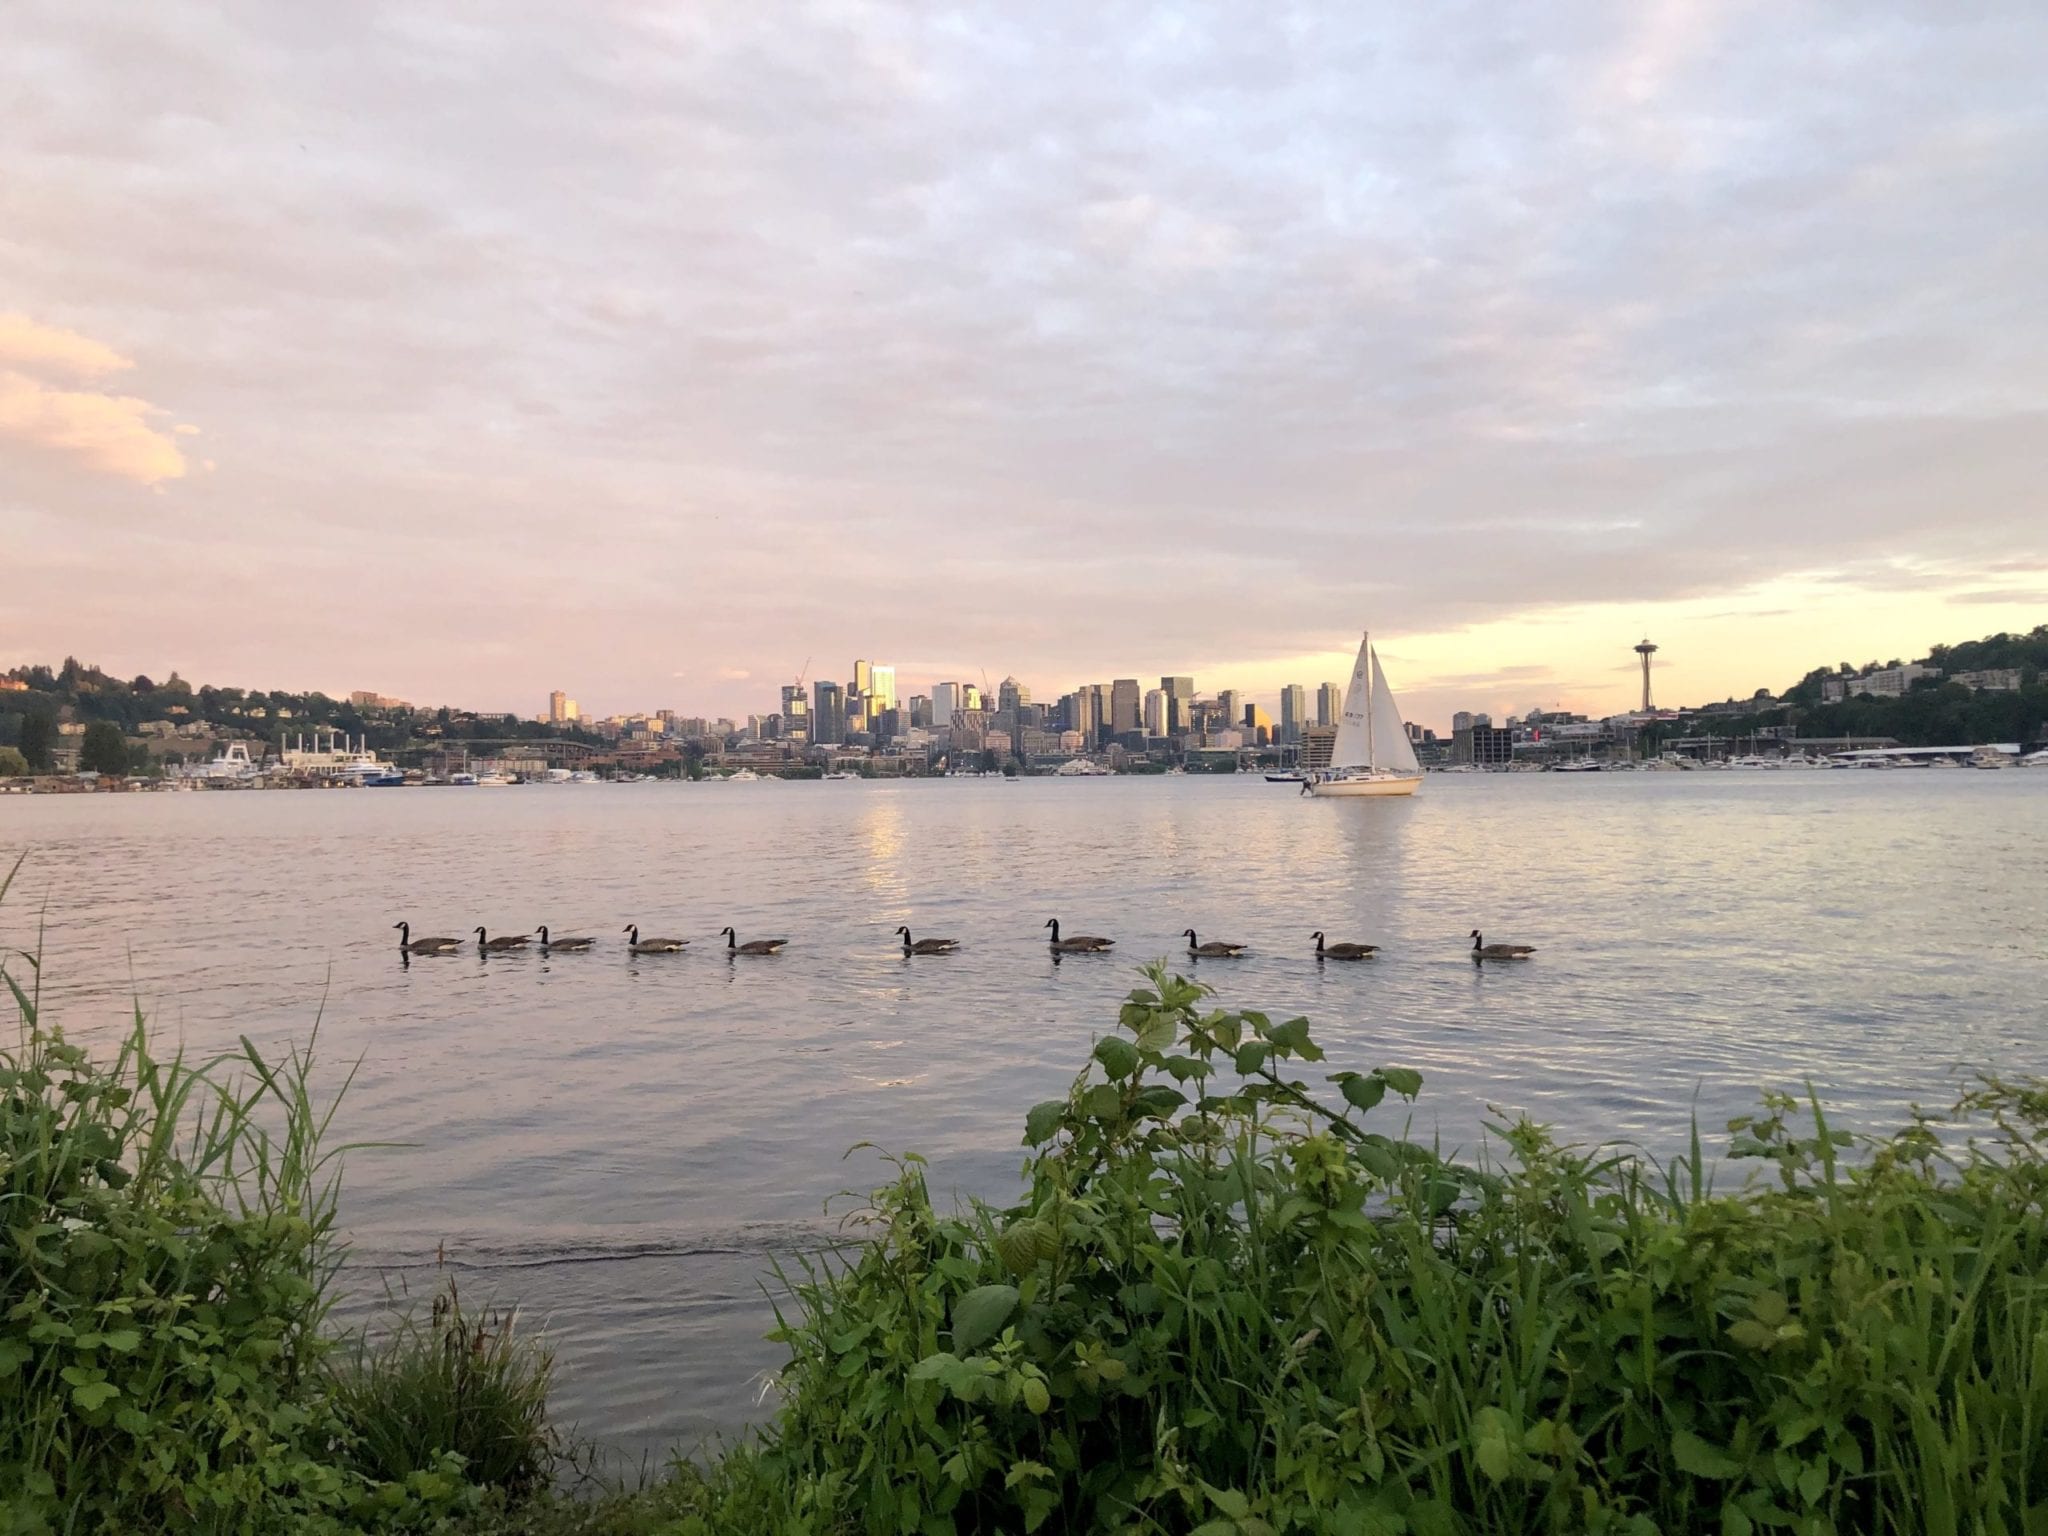 water with a row of geese and sailboat and downtown buildings on the horizon